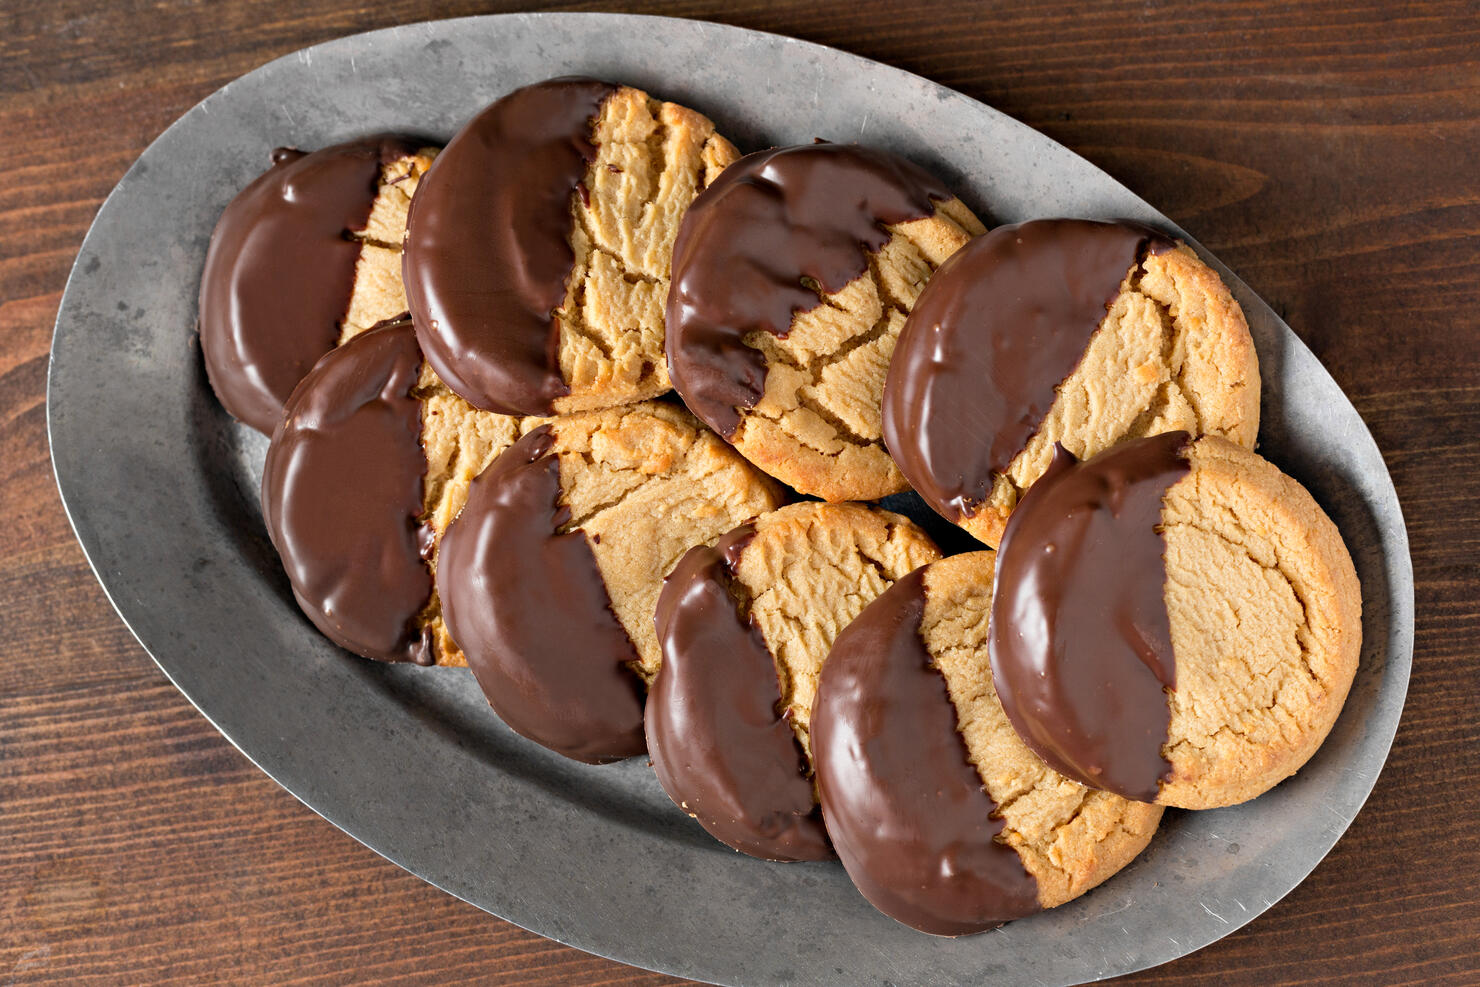 Platter With Chocolate Dipped Peanut Butter Cookies